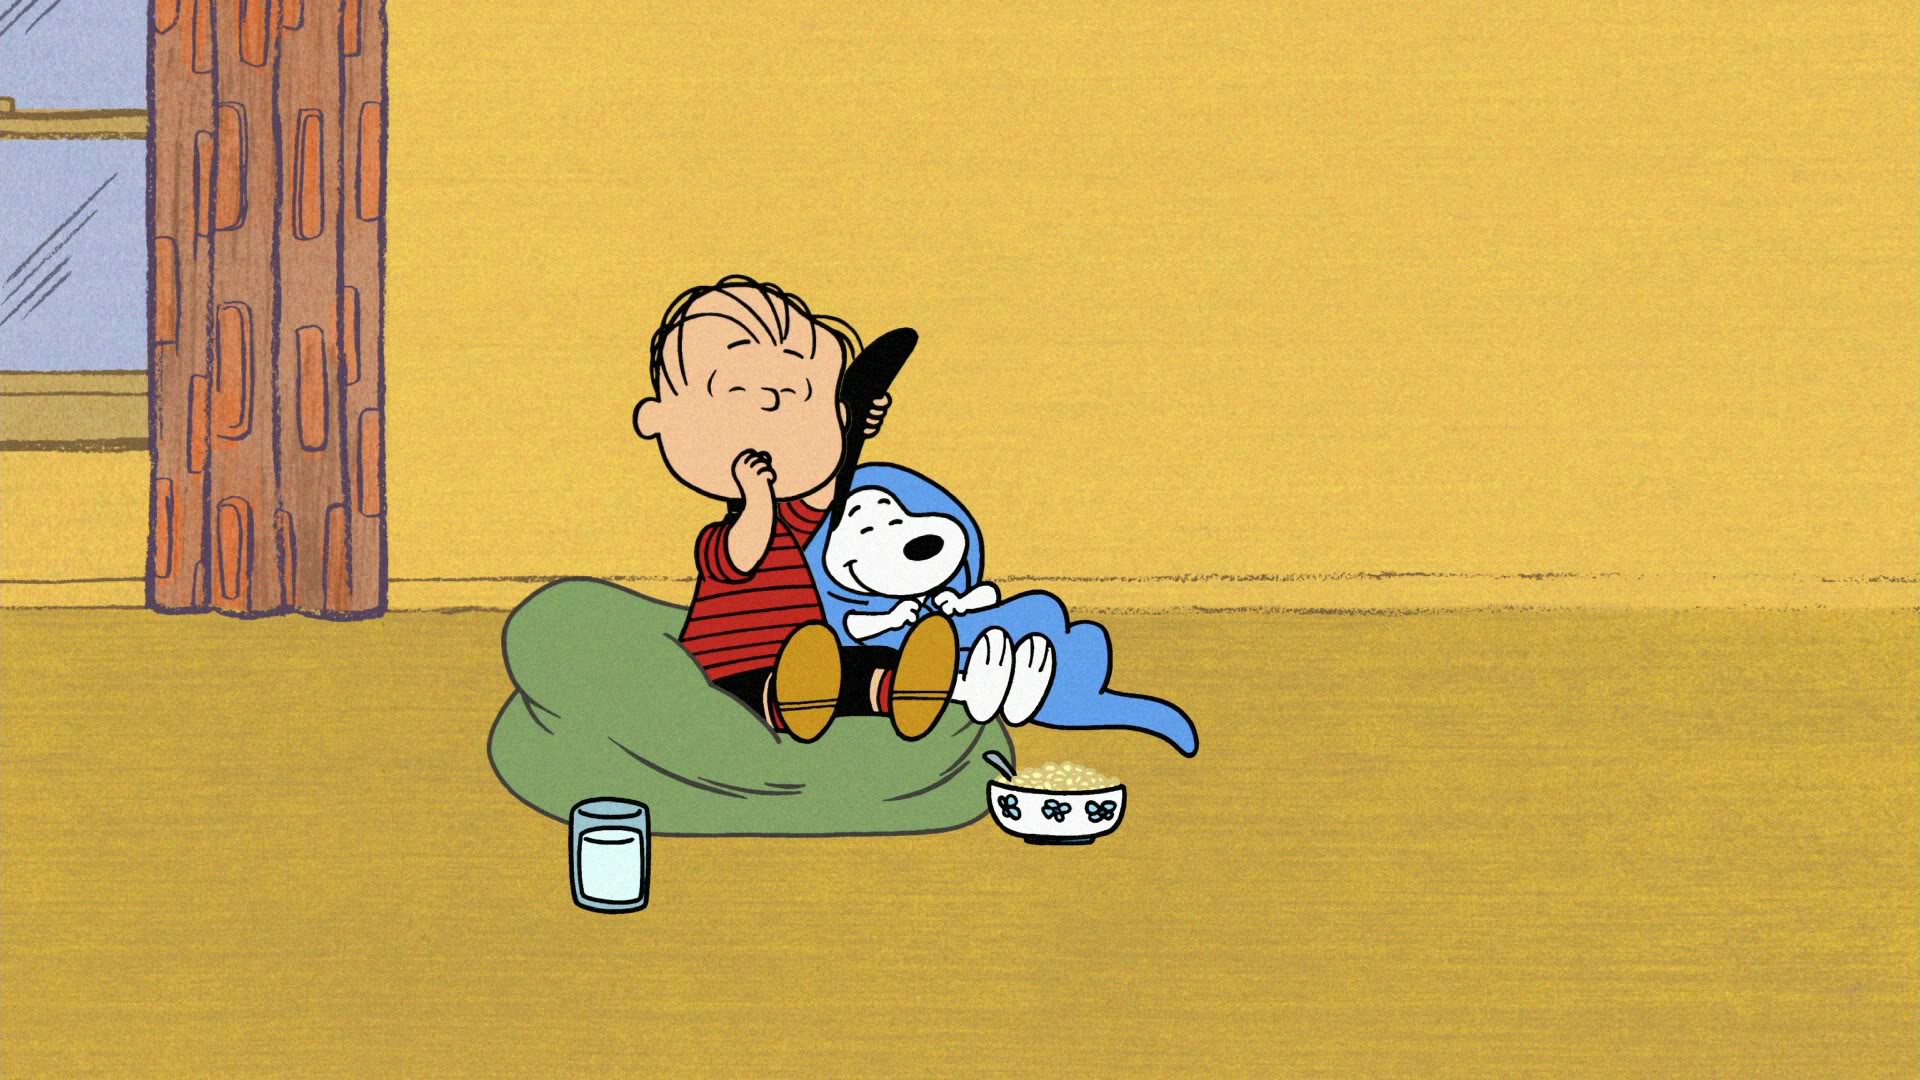 Charlie Brown Wallpaper Happiness Is A Warm Blanket Charlie Brown 338272 HD Wallpaper Backgrounds Download